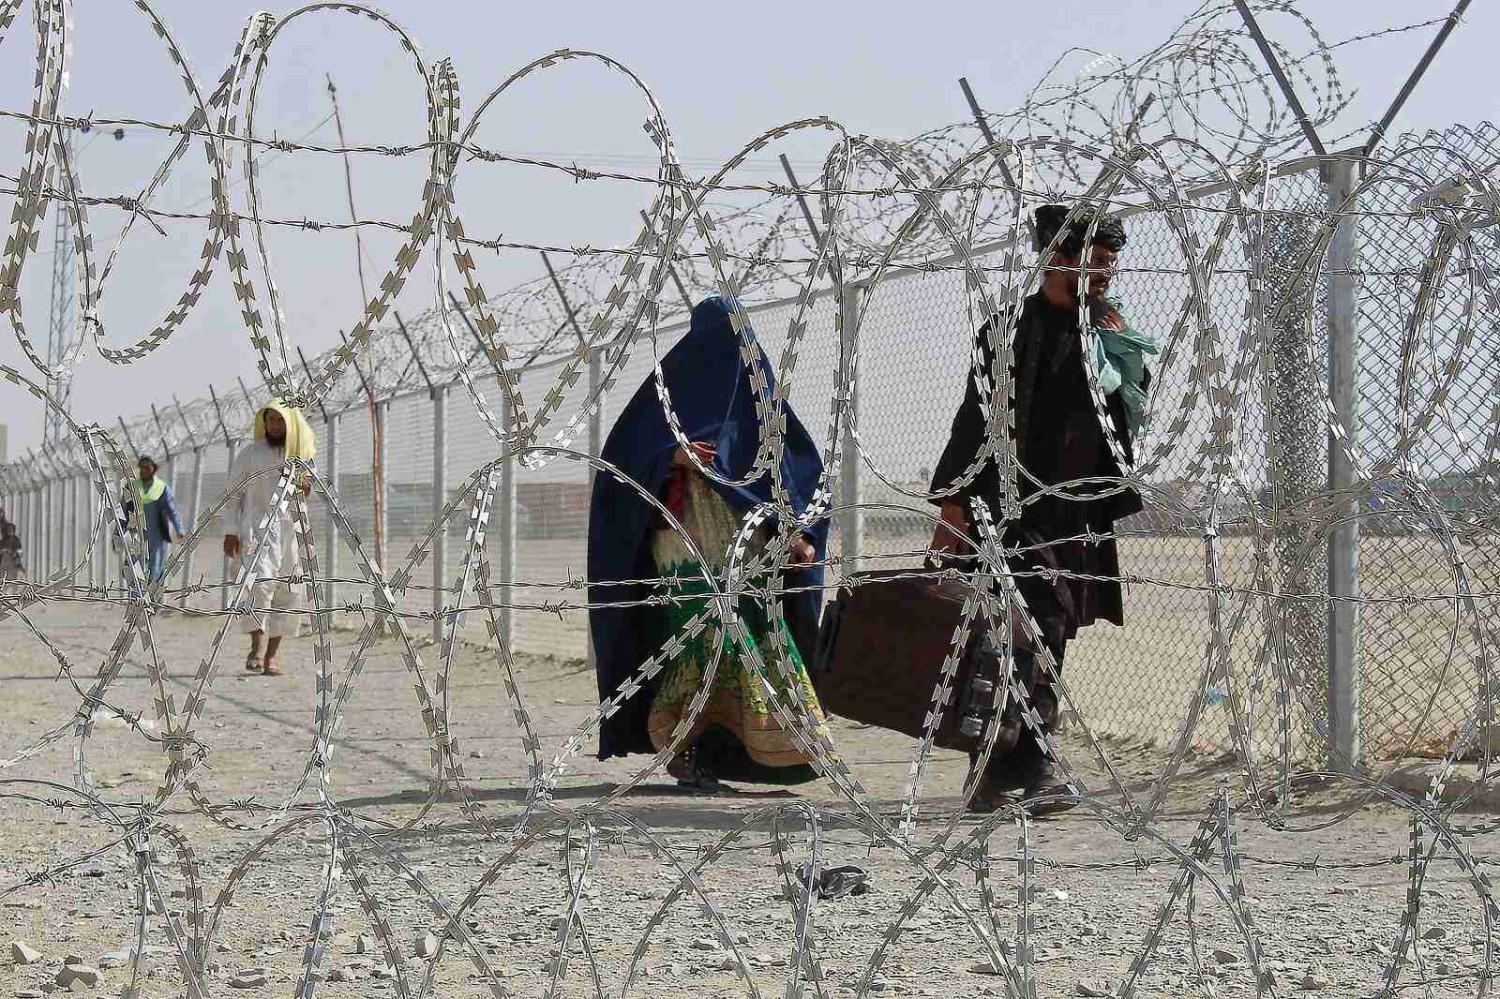 The border between Afghanistan and Pakistan is notoriously porous. Pakistan-Afghanistan border crossing point in Chaman, 28 August 2021 (AFP via Getty Images)